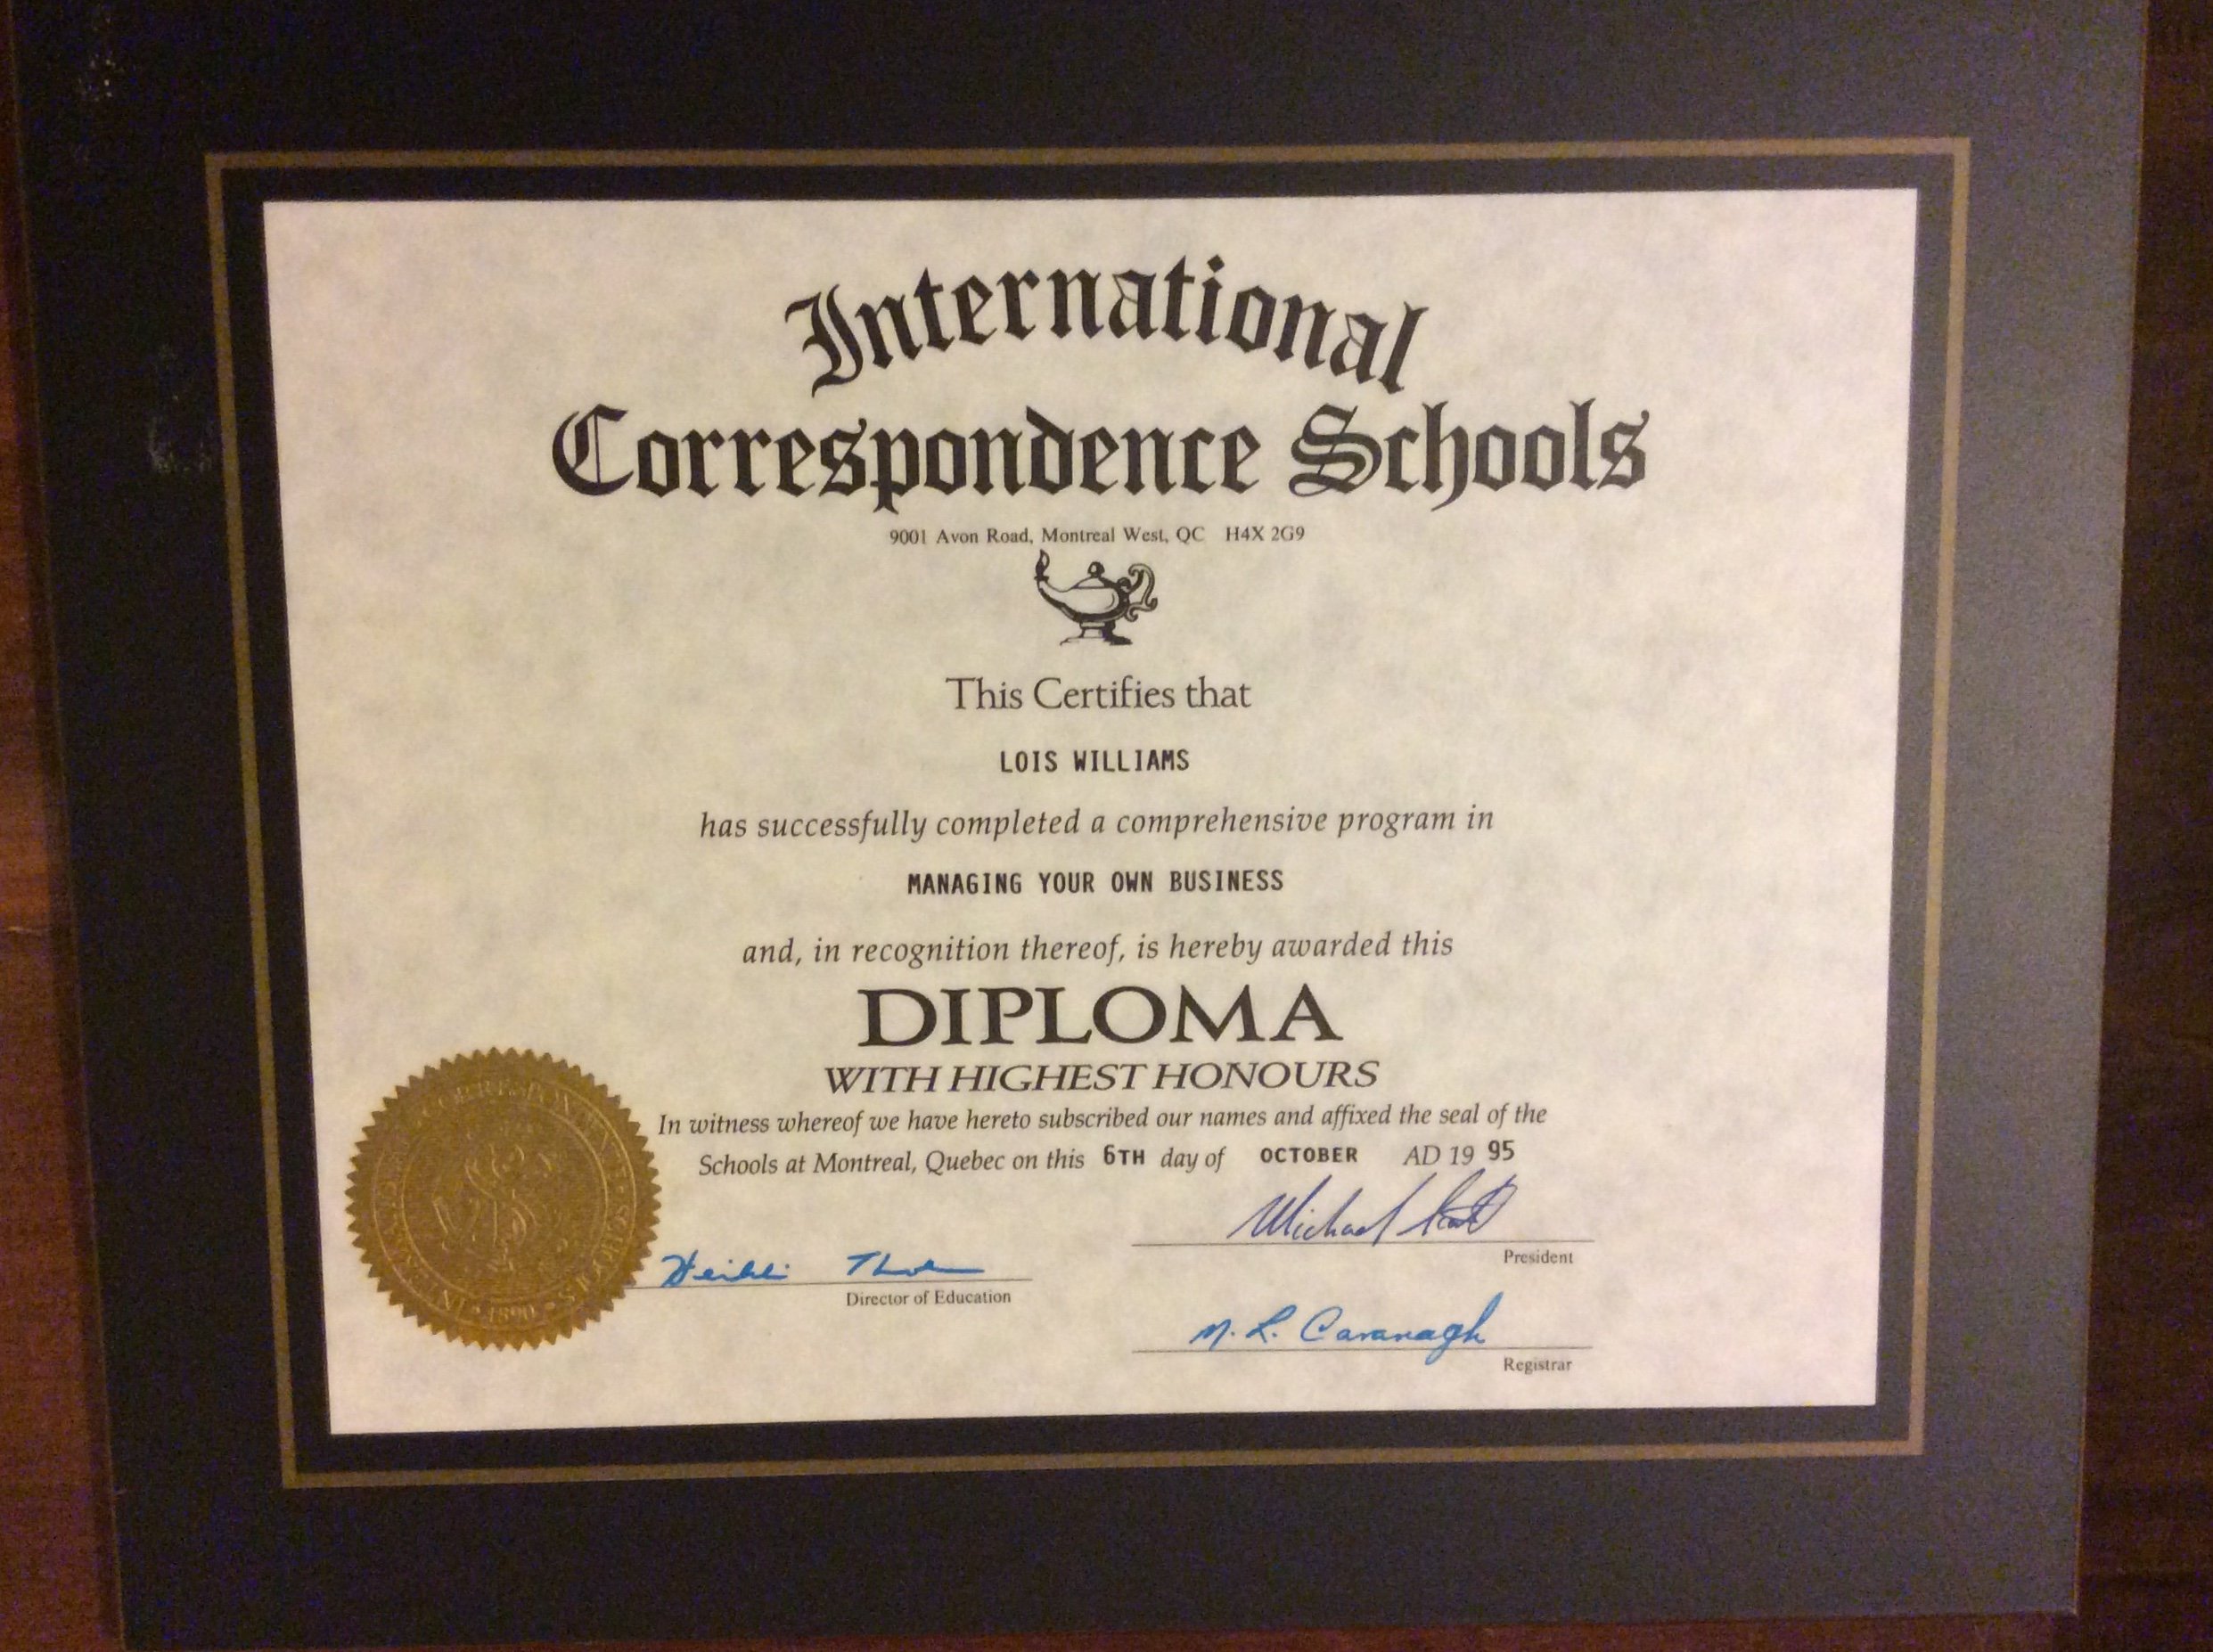 My Business Diploma 1995